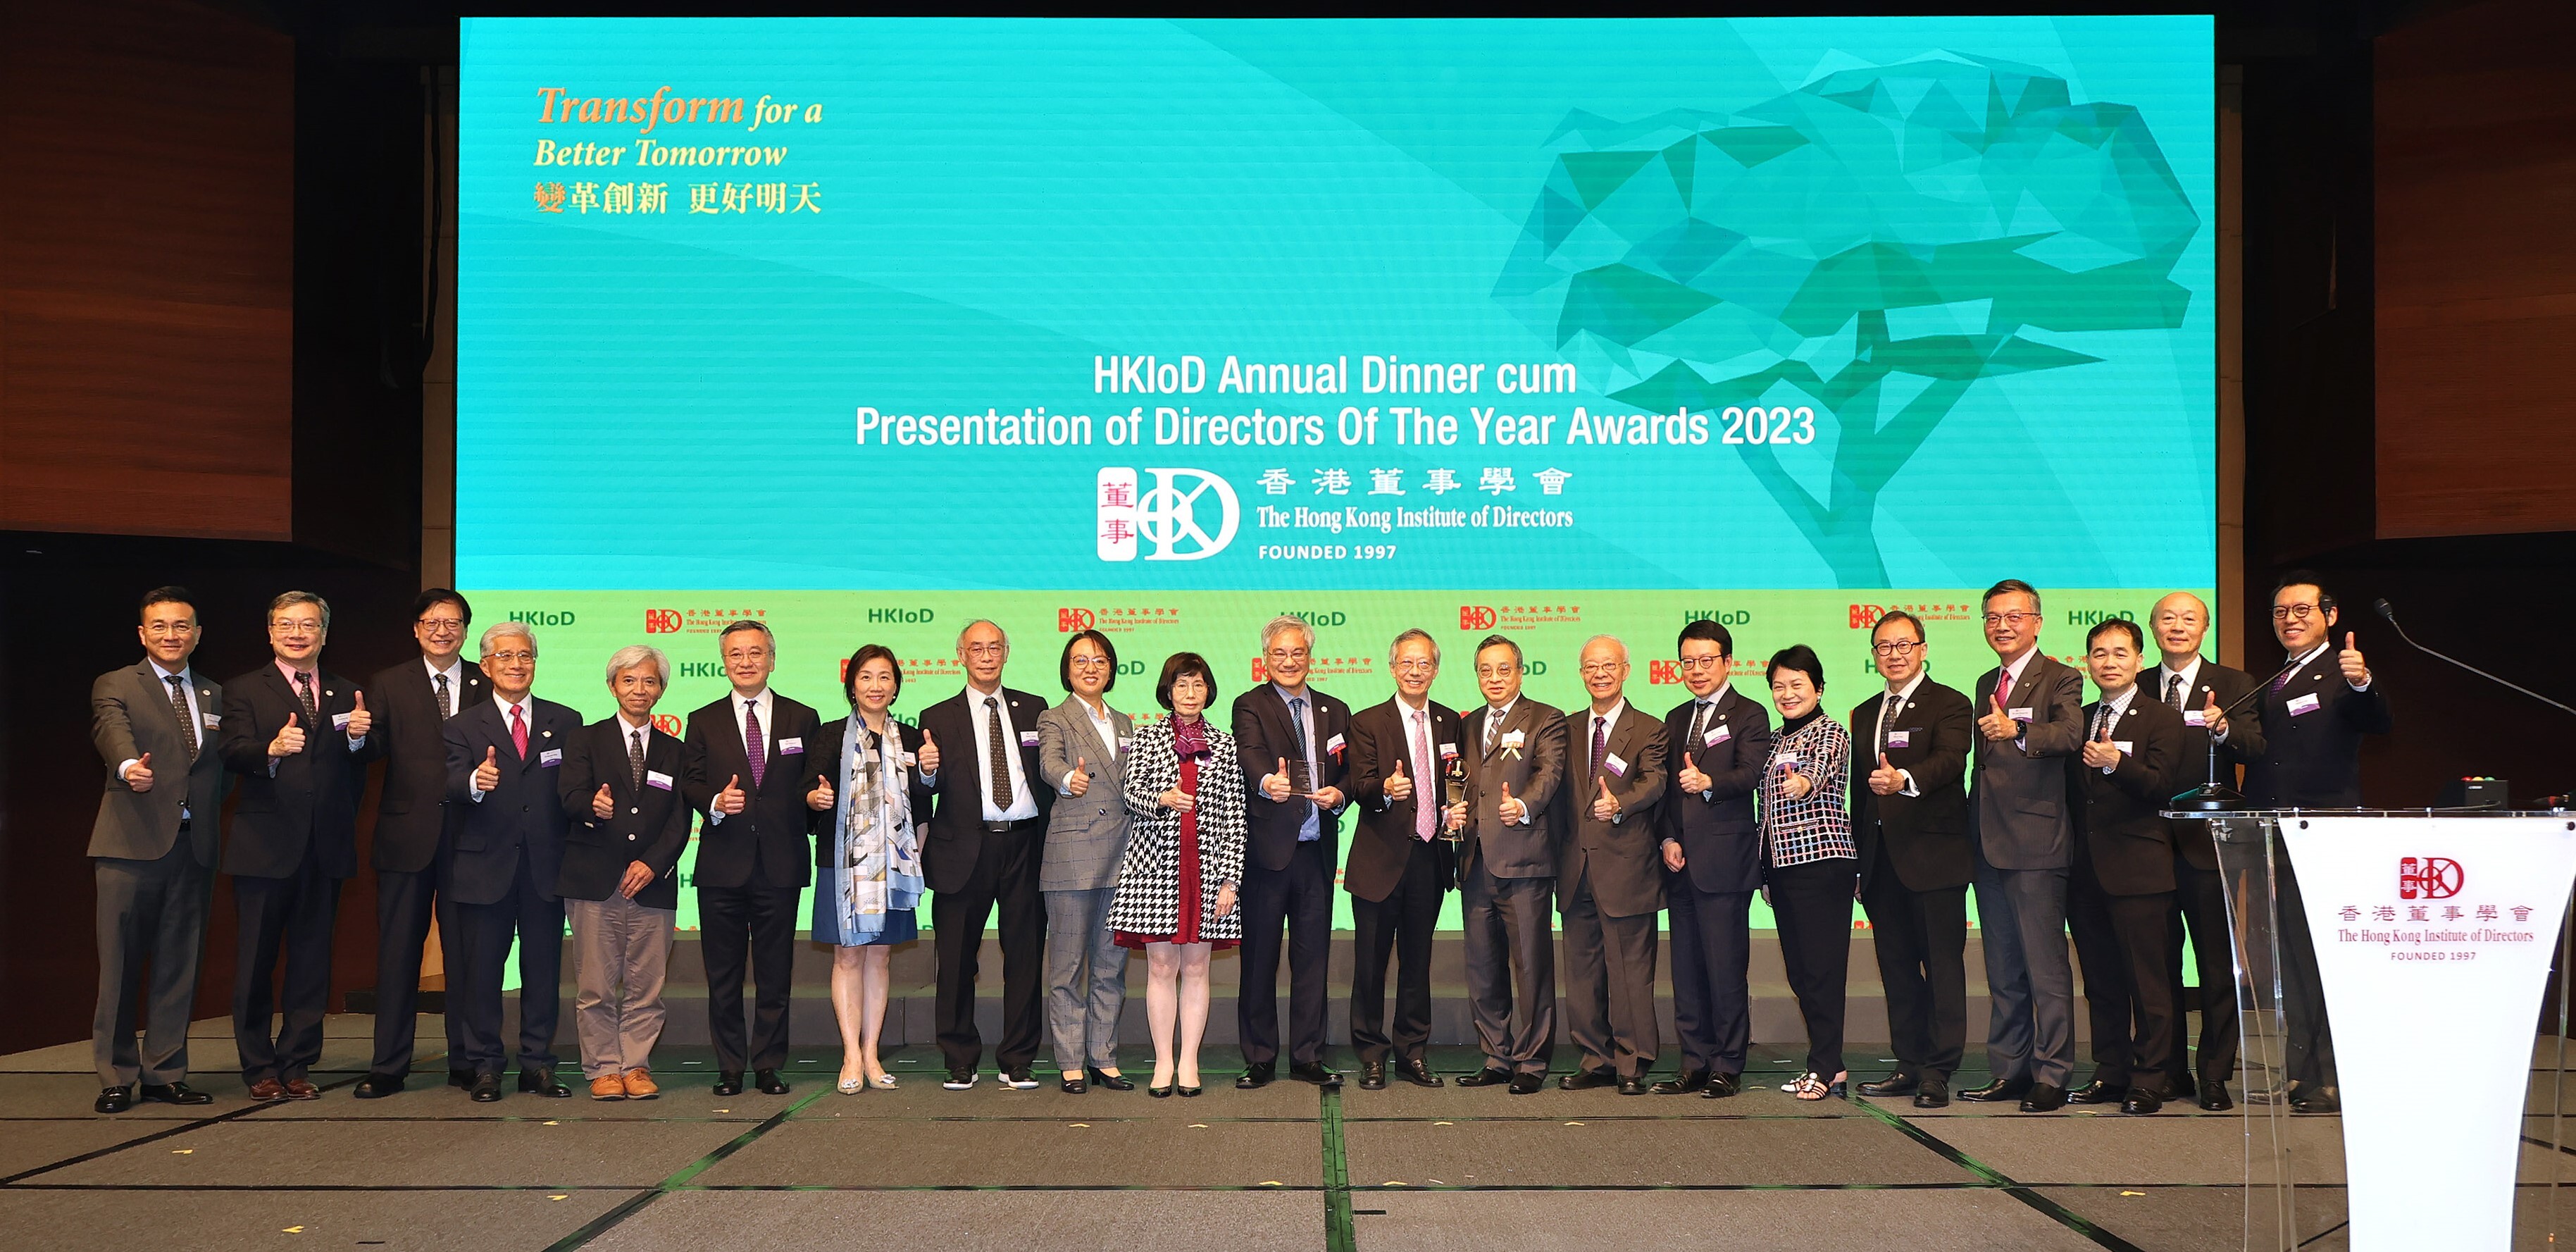 HKHS Chairman Walter Chan (tenth from the right) and Members of the HKHS Supervisory Board and Executive Committee receive the 